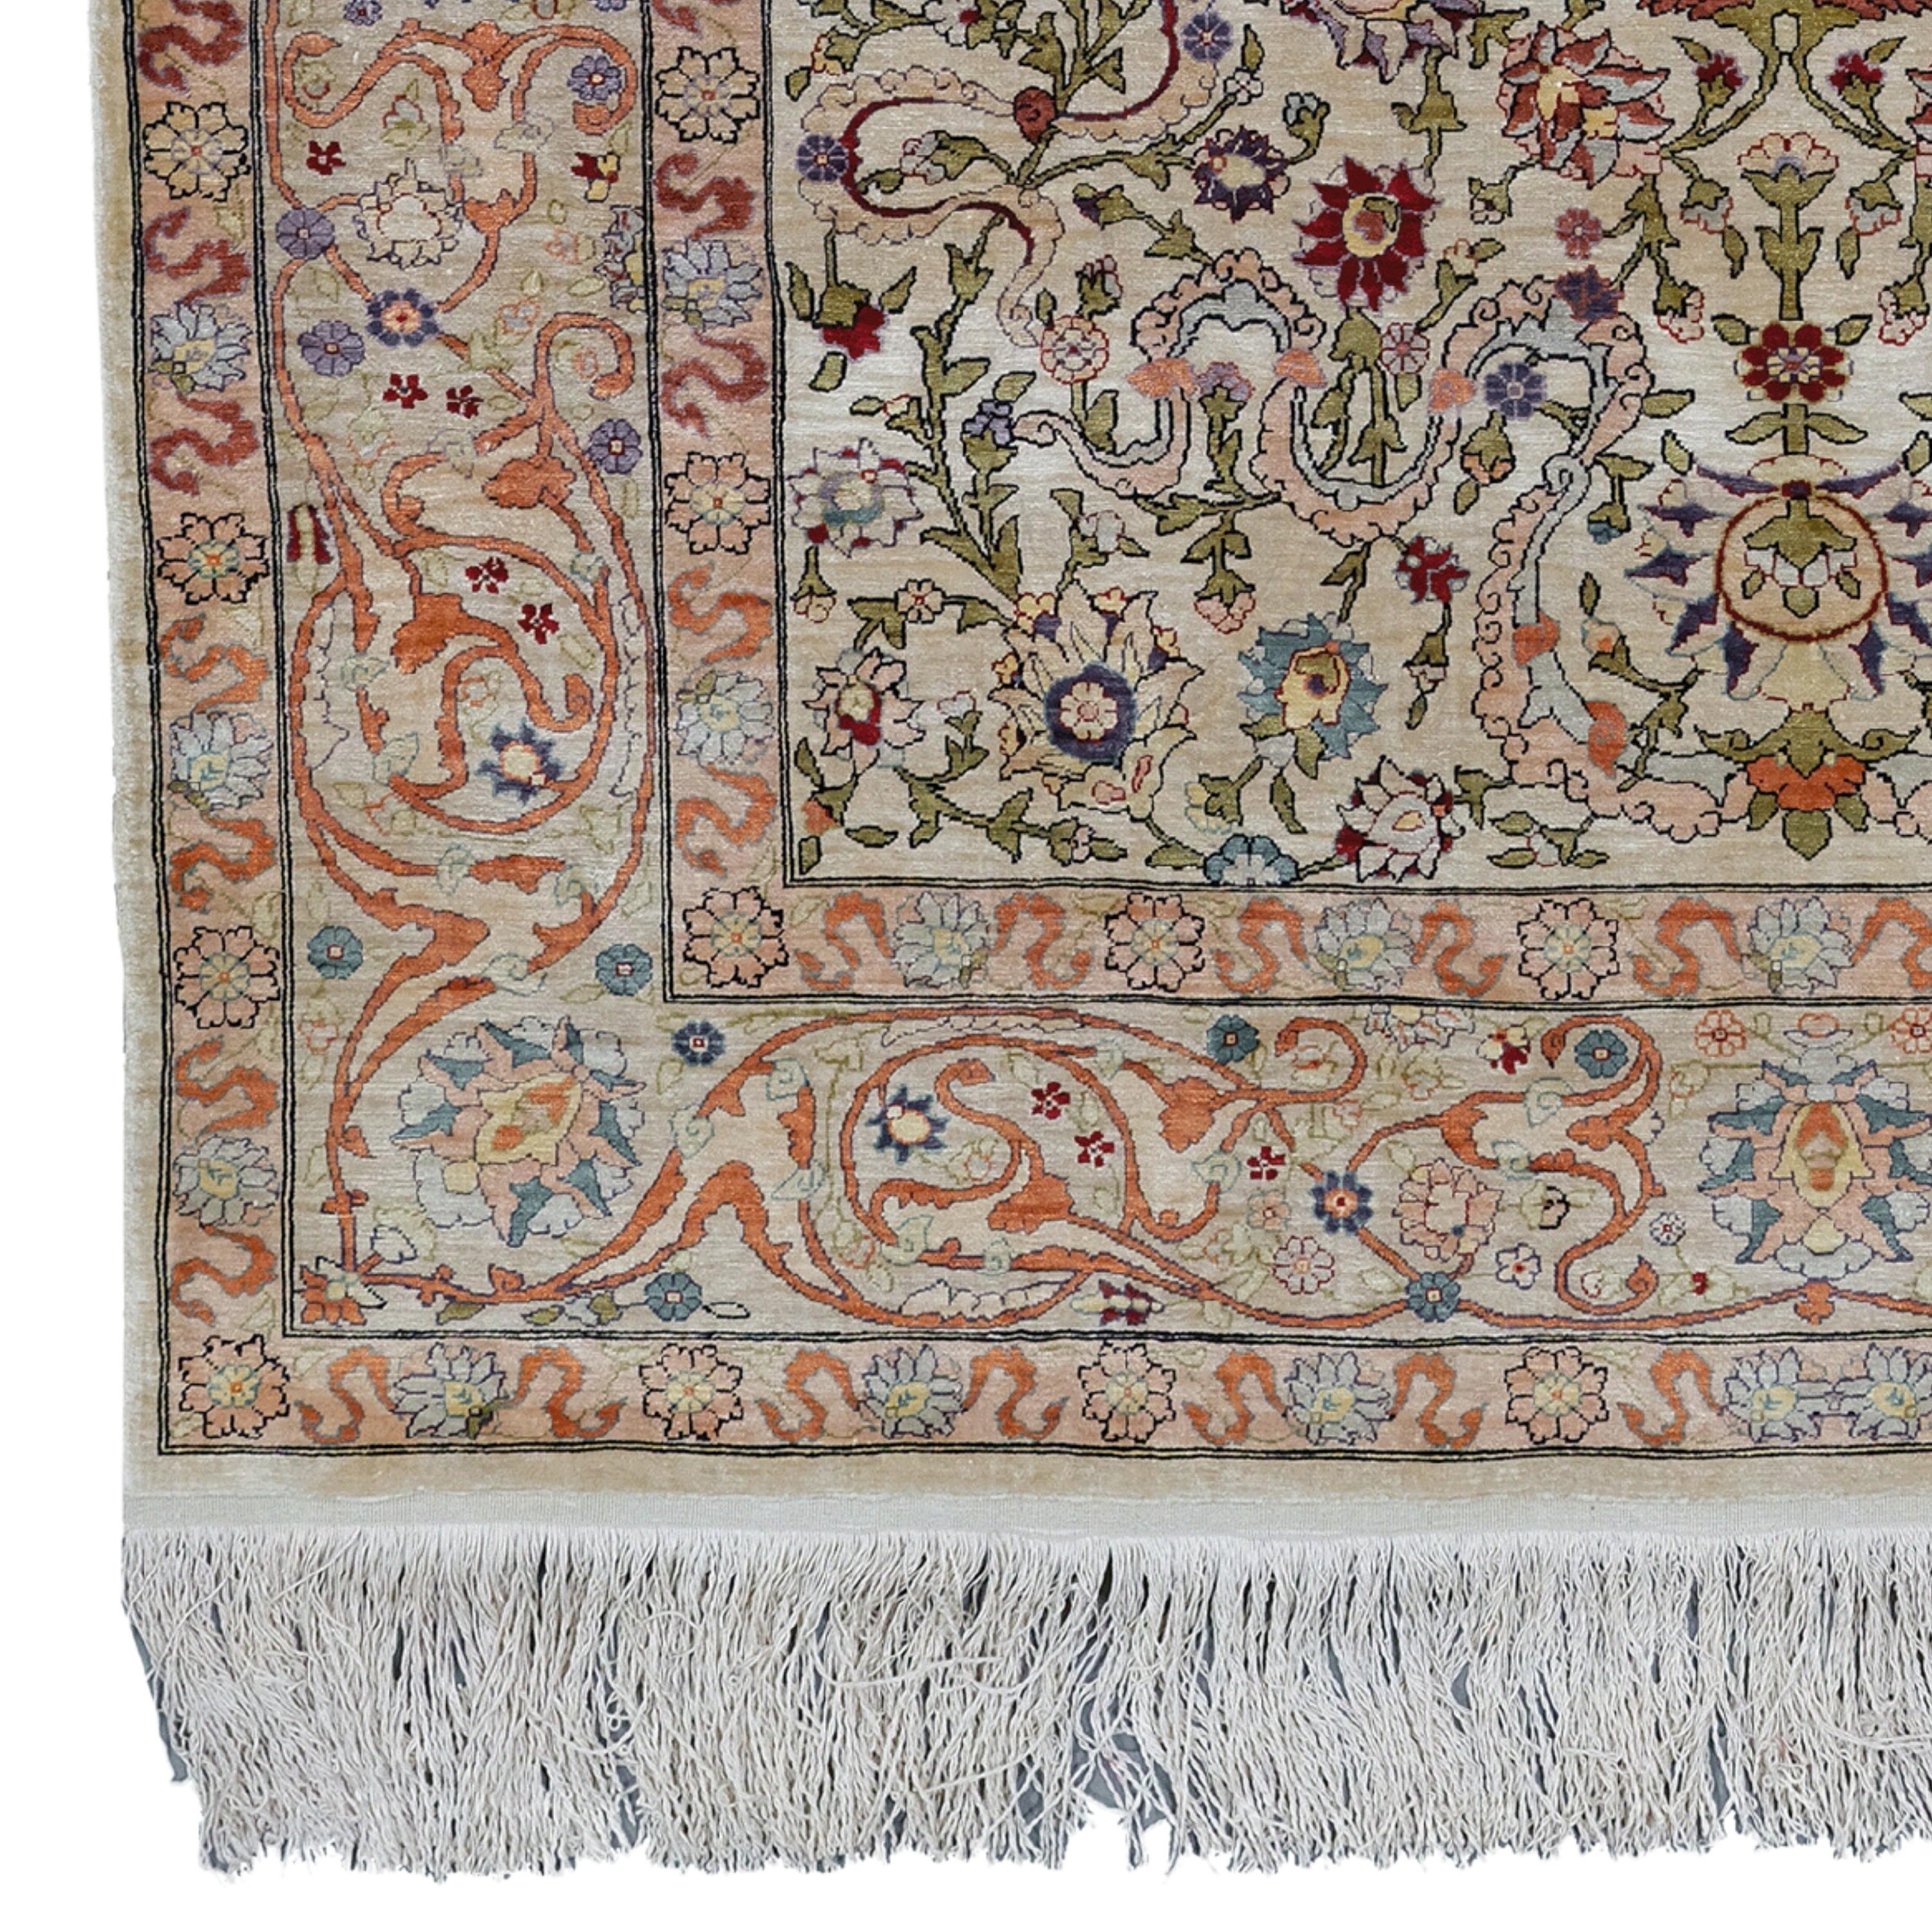 Antique Hereke Silk Rug  Vintage Silk Rug
20th Century Turkish Hereke Silk Rug

This magnificent carpet is a masterpiece, every inch of which is woven with precision and care, telling the rich cultural texture of the period. Its intricate patterns